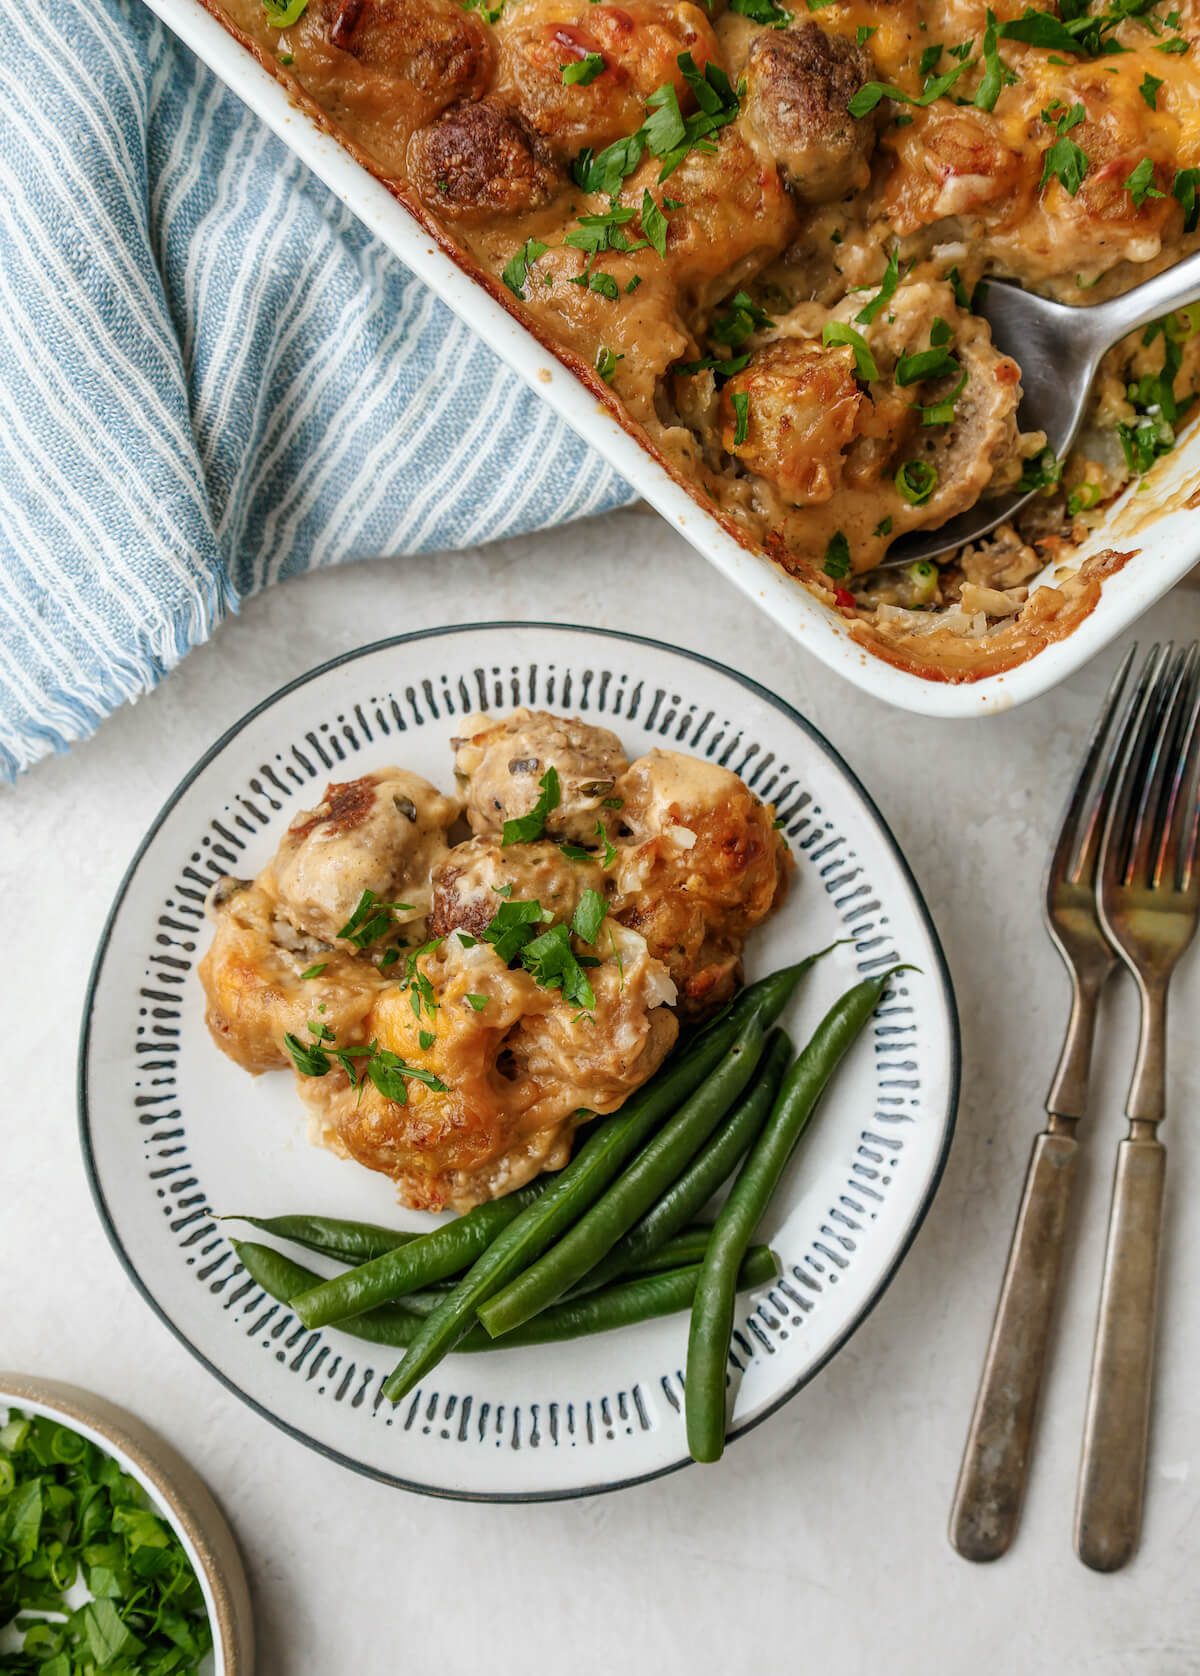 A serving of meatballs and tater tots in cheesy cream sauce with side of green beans.